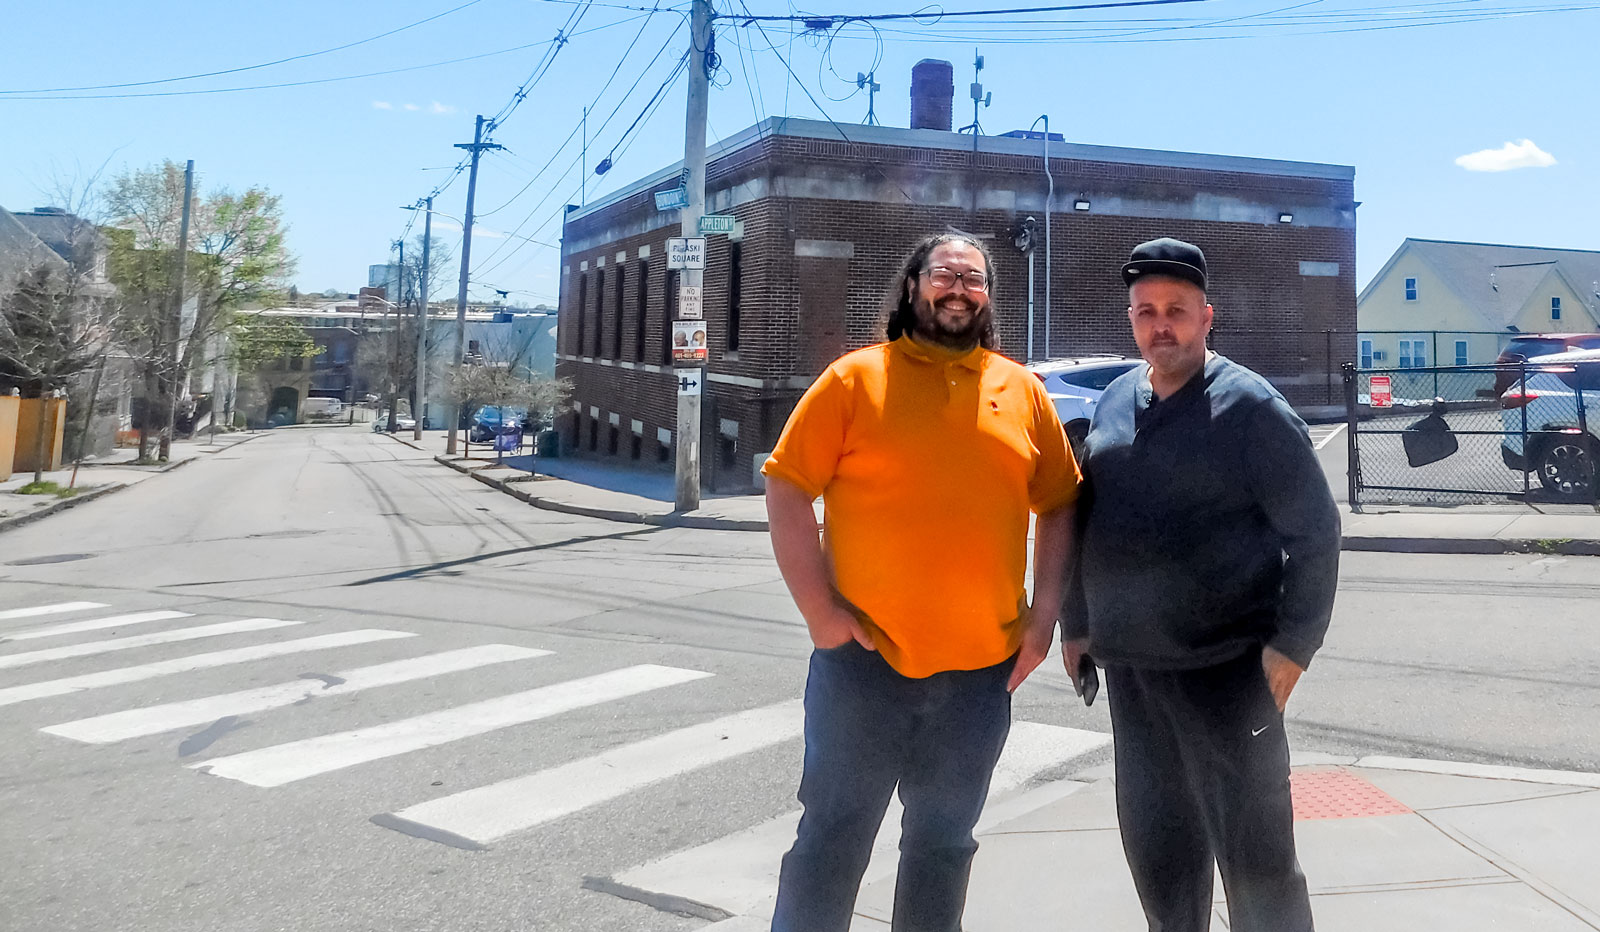 Antonio Rodriguez, ONE|NB’s Assistant Director of Asset Management, left, and Harry Quiñones, of Providence, stand outside ONE Neighborhood Builders' office on Chaffee Street, where one of the ONE|NB Connects WiFi transmitters is located.